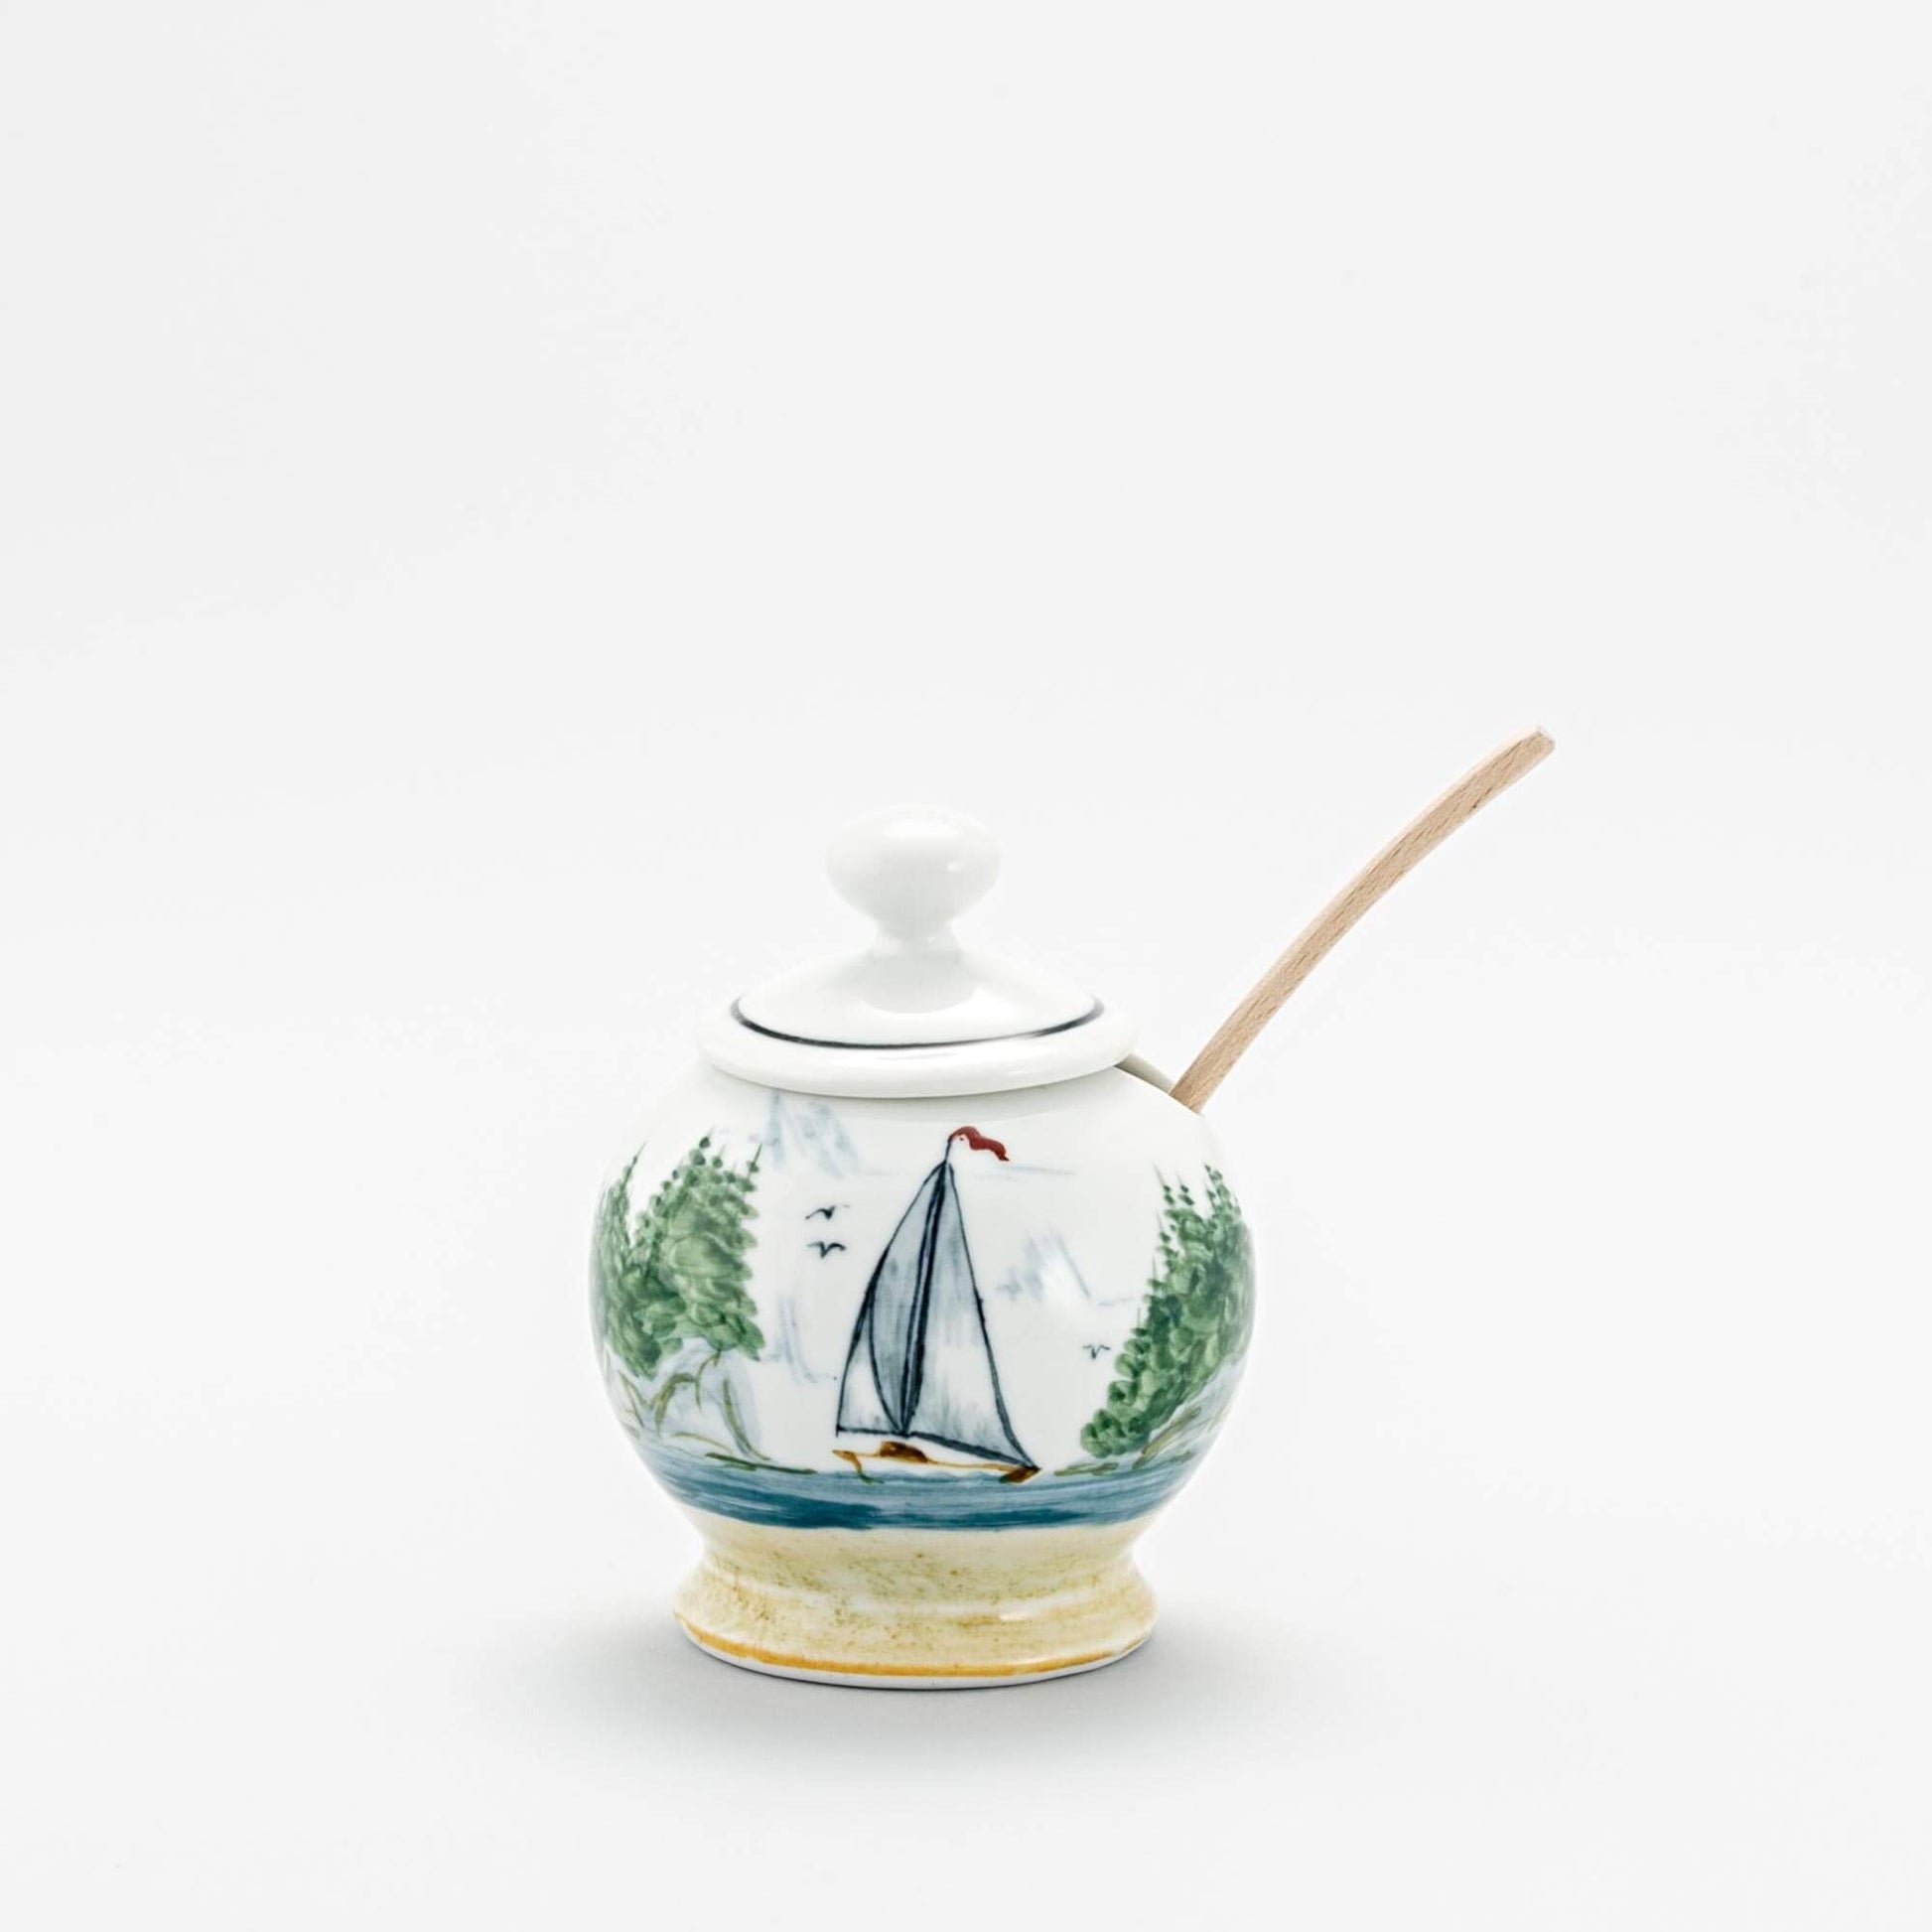 Handmade Pottery Sugar Jar in Sailboat pattern made by Georgetown Pottery in Maine